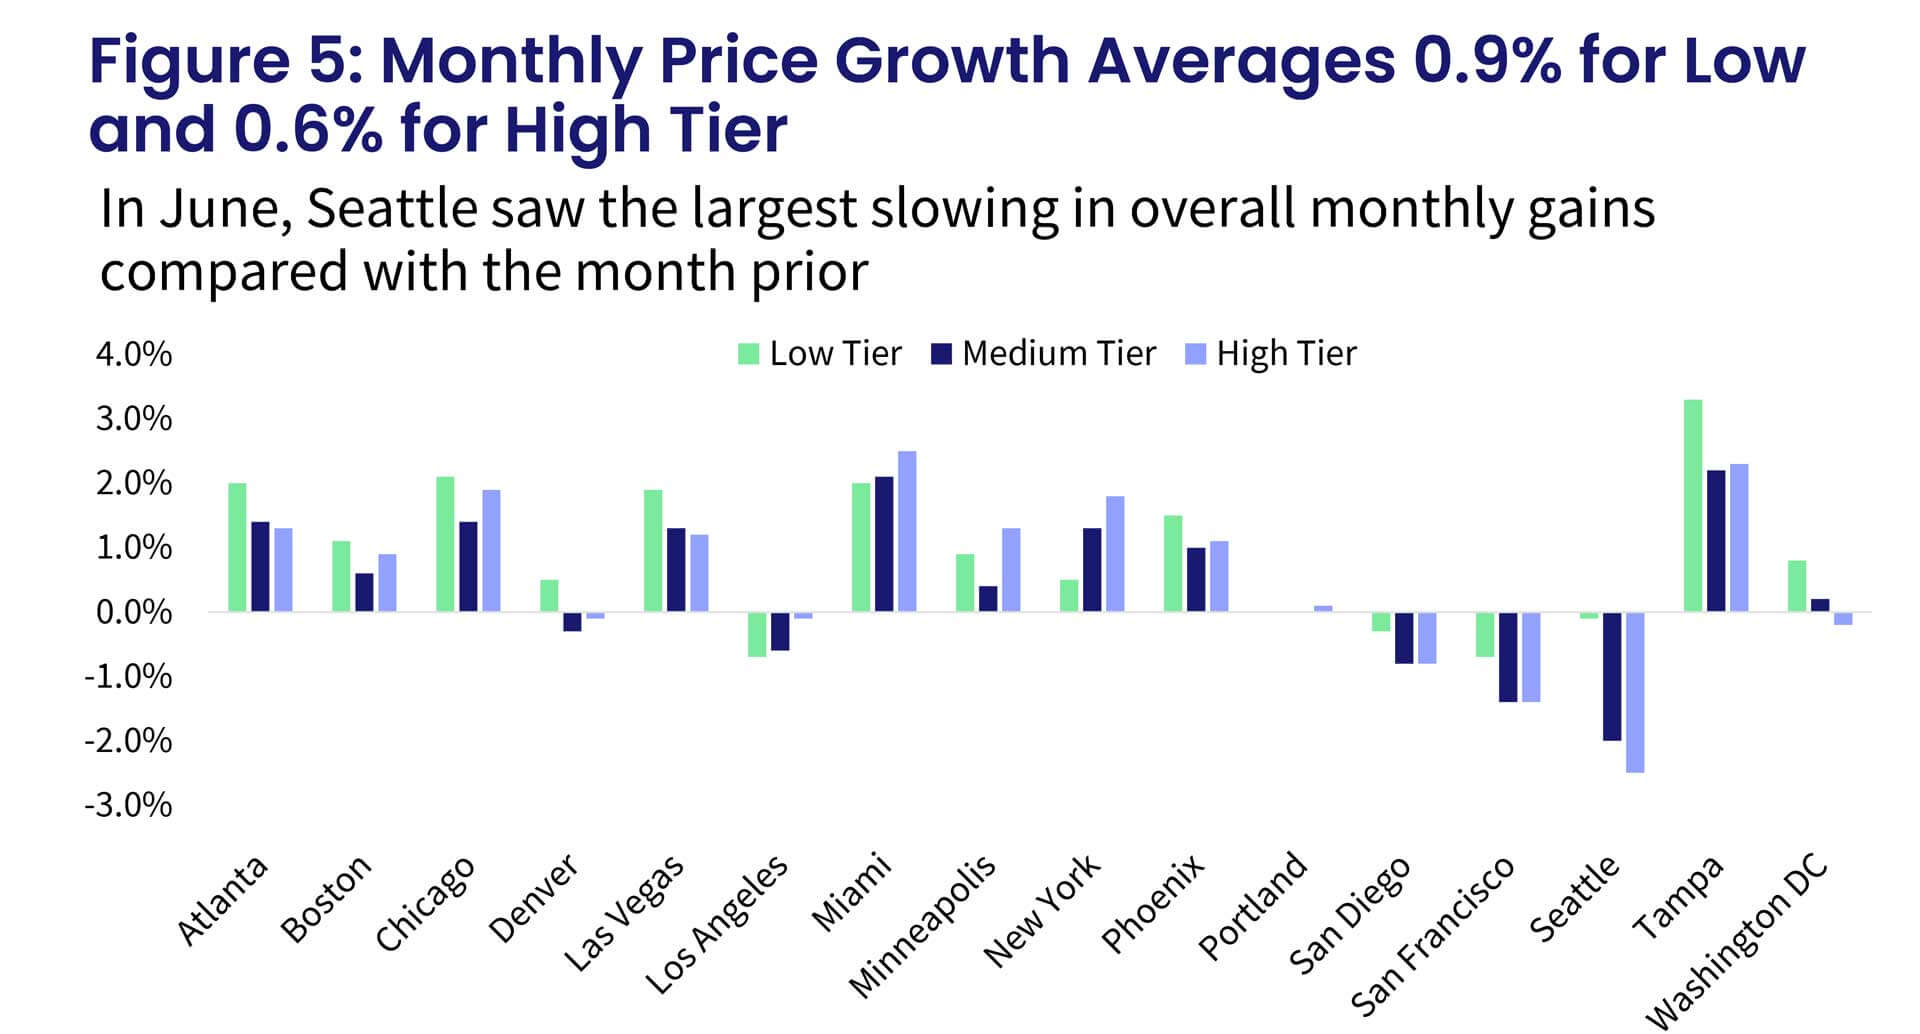 Figure 5: Monthly Price Growth Averages 0.9% for Low and 0.6% for High Tier